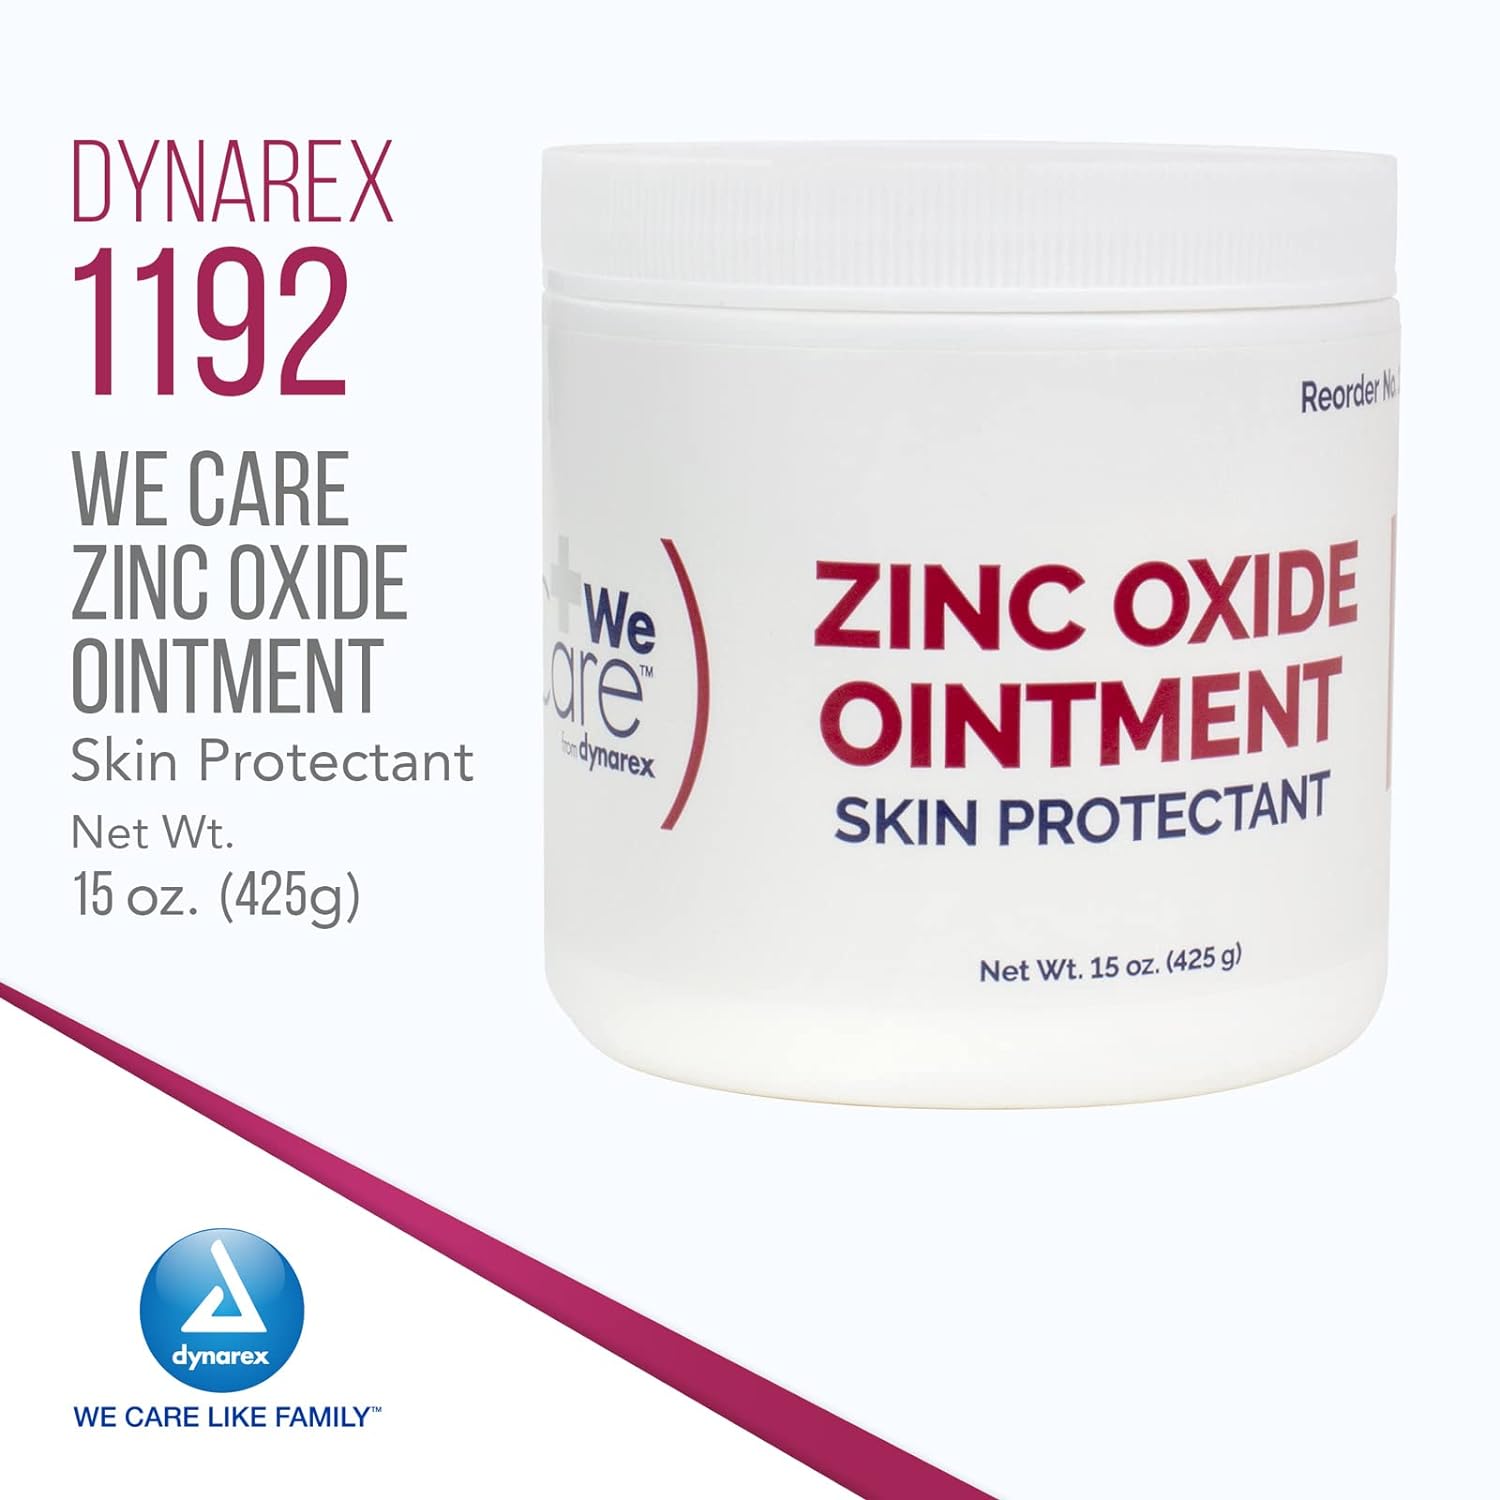 Dynarex Zinc Oxide Ointment, Soothes, Prevents, and Relieves Diaper Rash, Chaffed Skin, and Irritation, White, 1 Count - 15 oz. Jar of Ointment